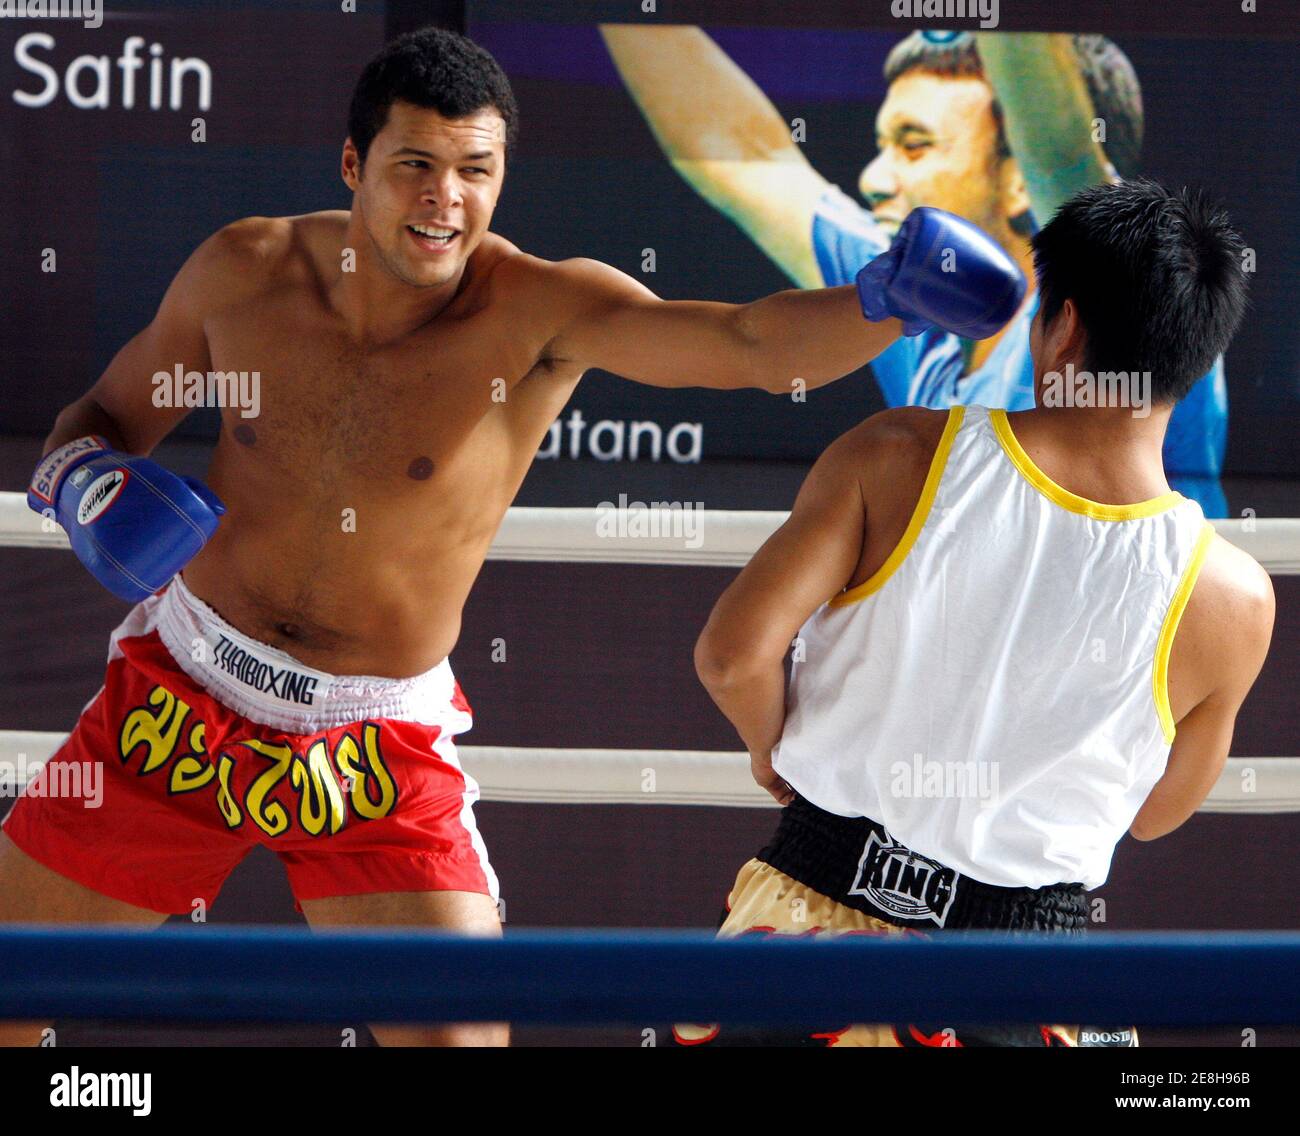 Jo-Wilfried Tsonga of France (L) practices Thai boxing, also known as Muay Thai, with Olympic gold medallist boxer Somluck Kamsing in Bangkok September 25, 2008. Tsonga is in Bangkok to take part in the Thailand Open tennis tournament.   REUTERS/Chaiwat Subprasom (THAILAND) Stock Photo